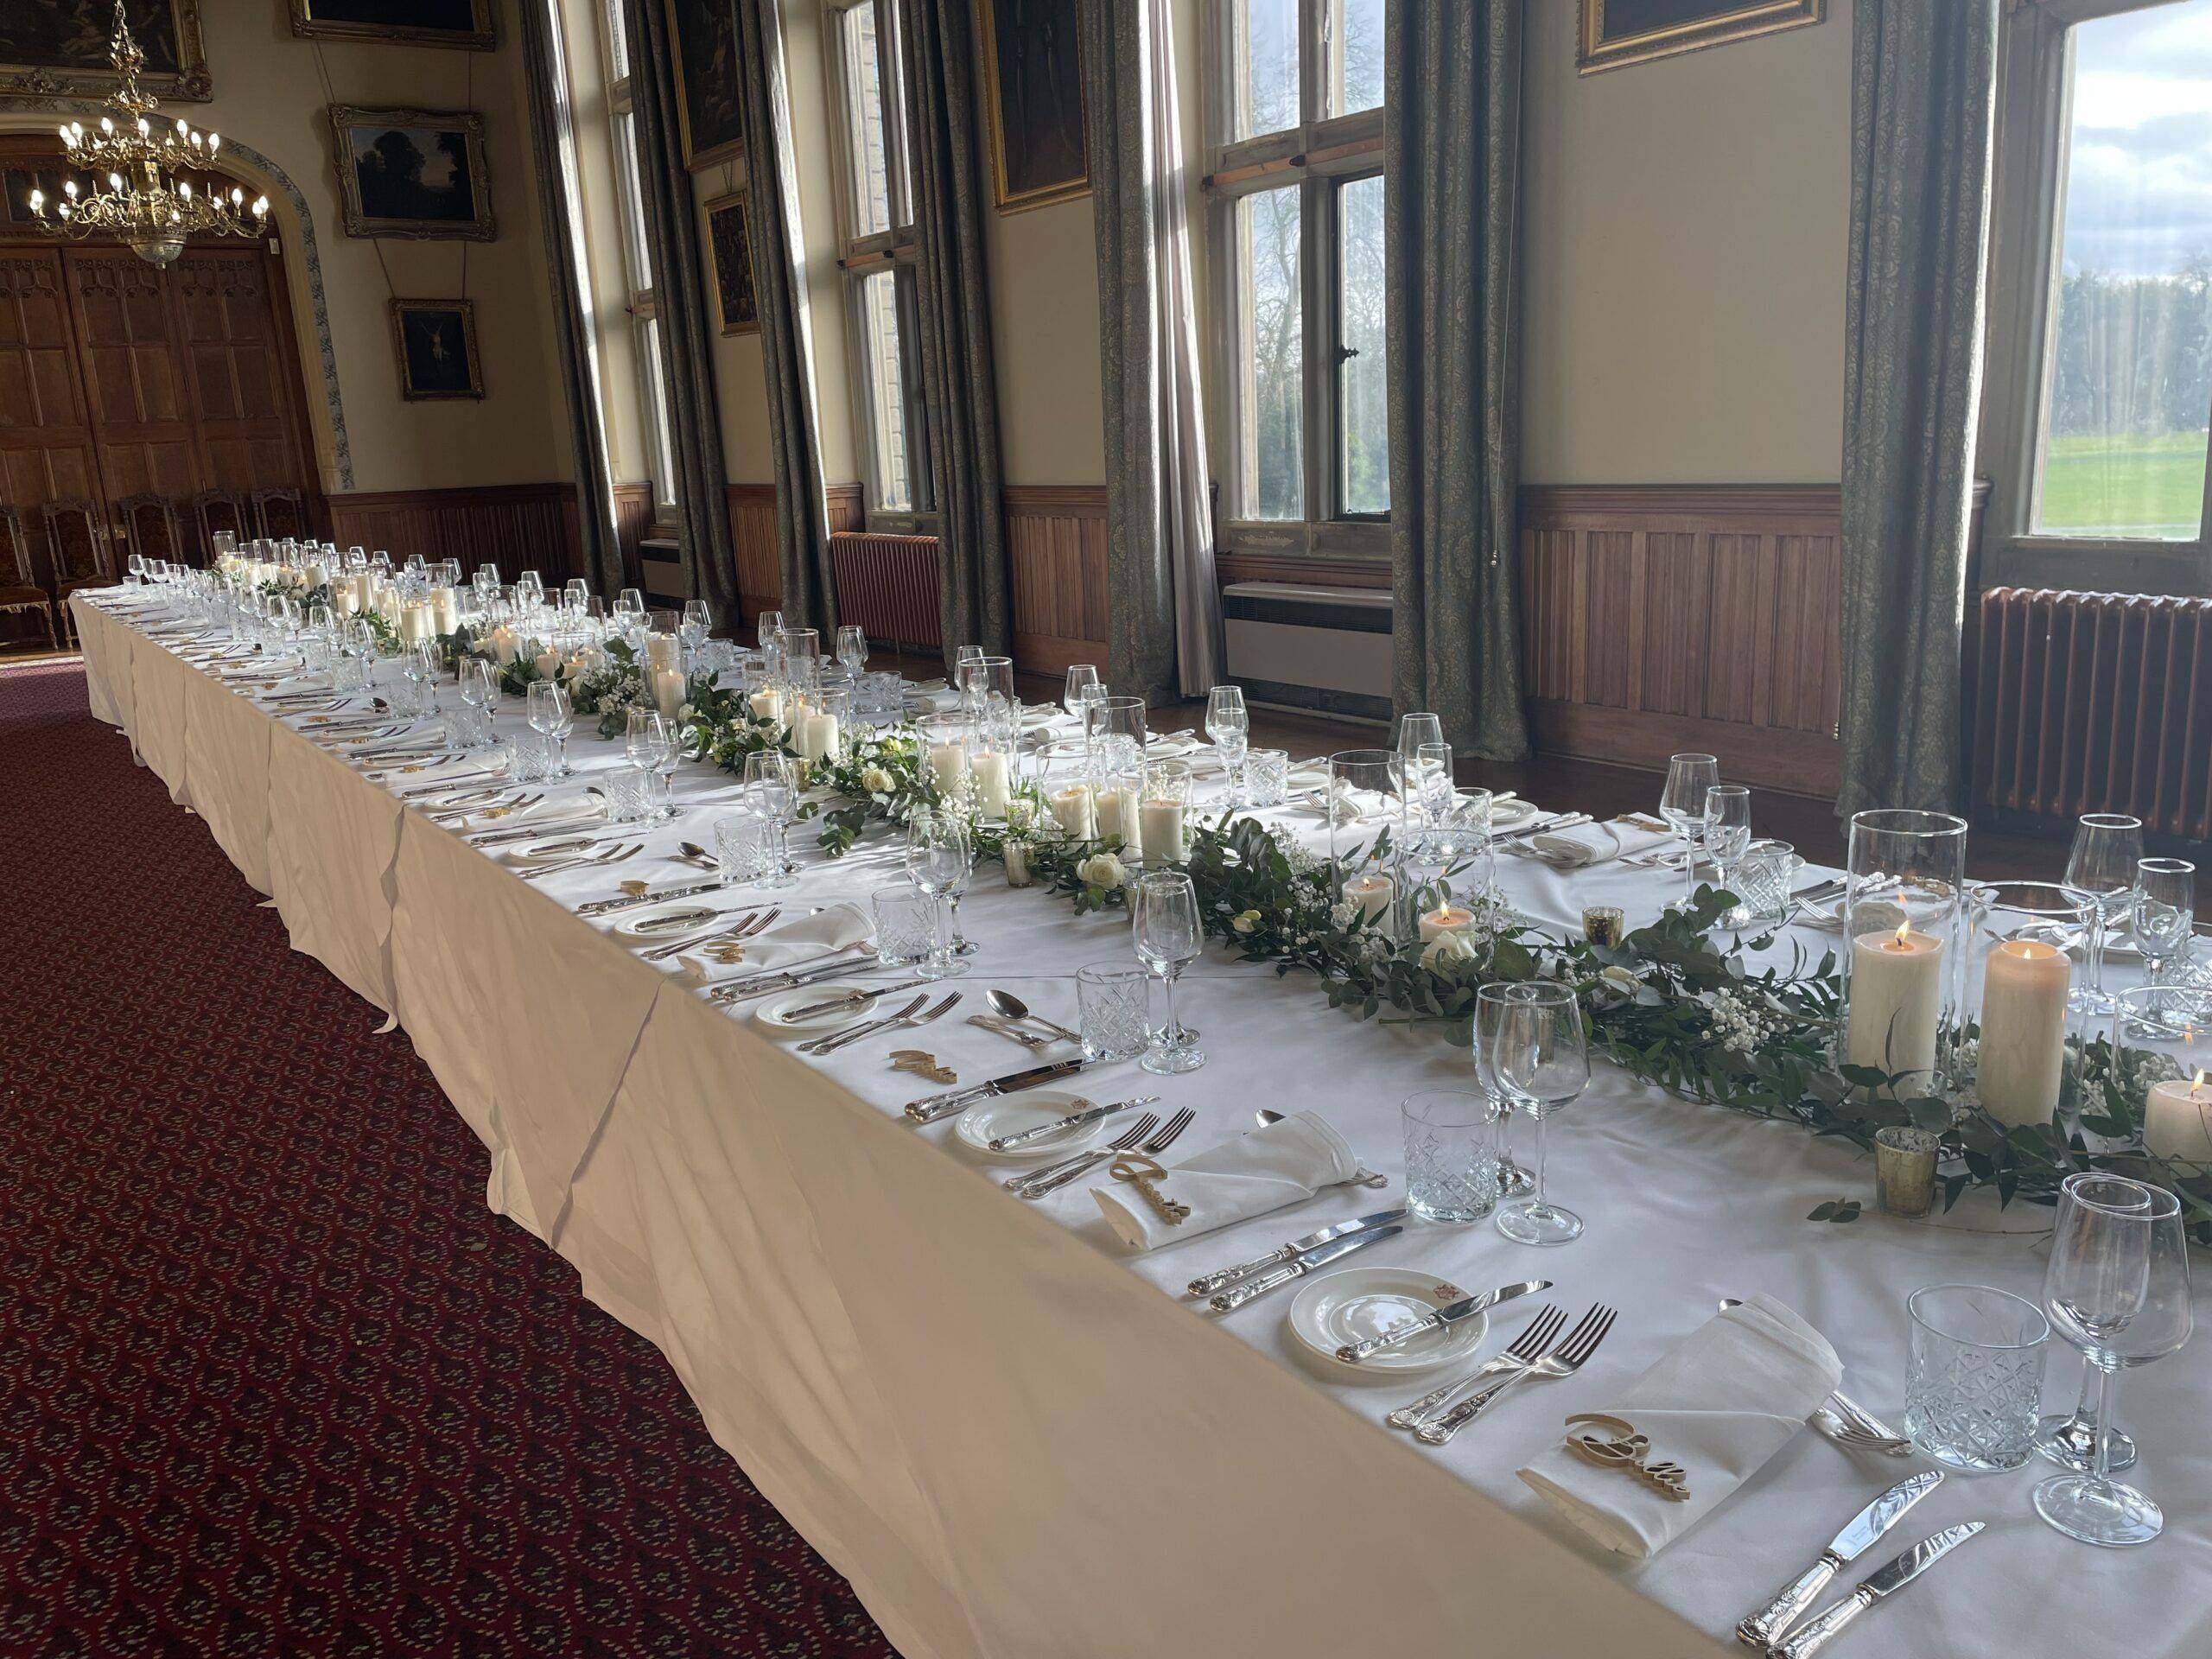 a long table is set for a formal dinner.